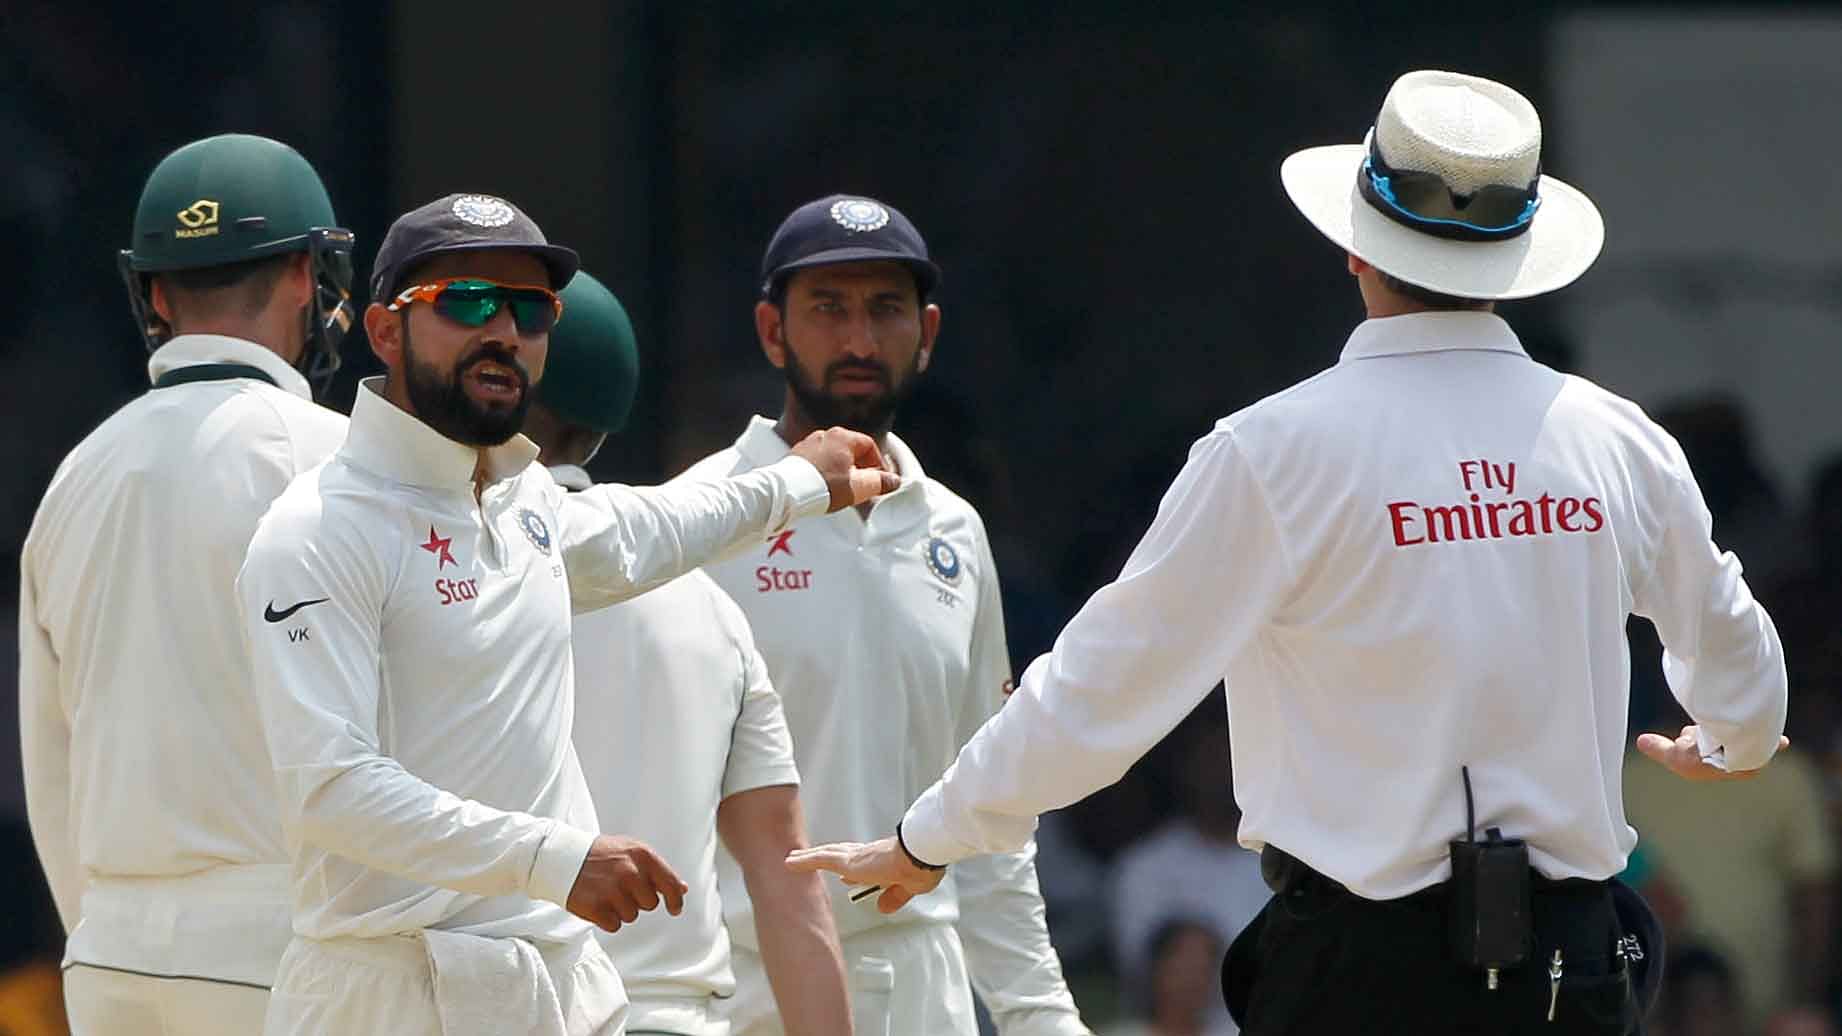 Virat Kohli went complaining to the umpires after Steve Smith asked his dressing roo, for help regarding a DRS appeal. (Photo: BCCI)